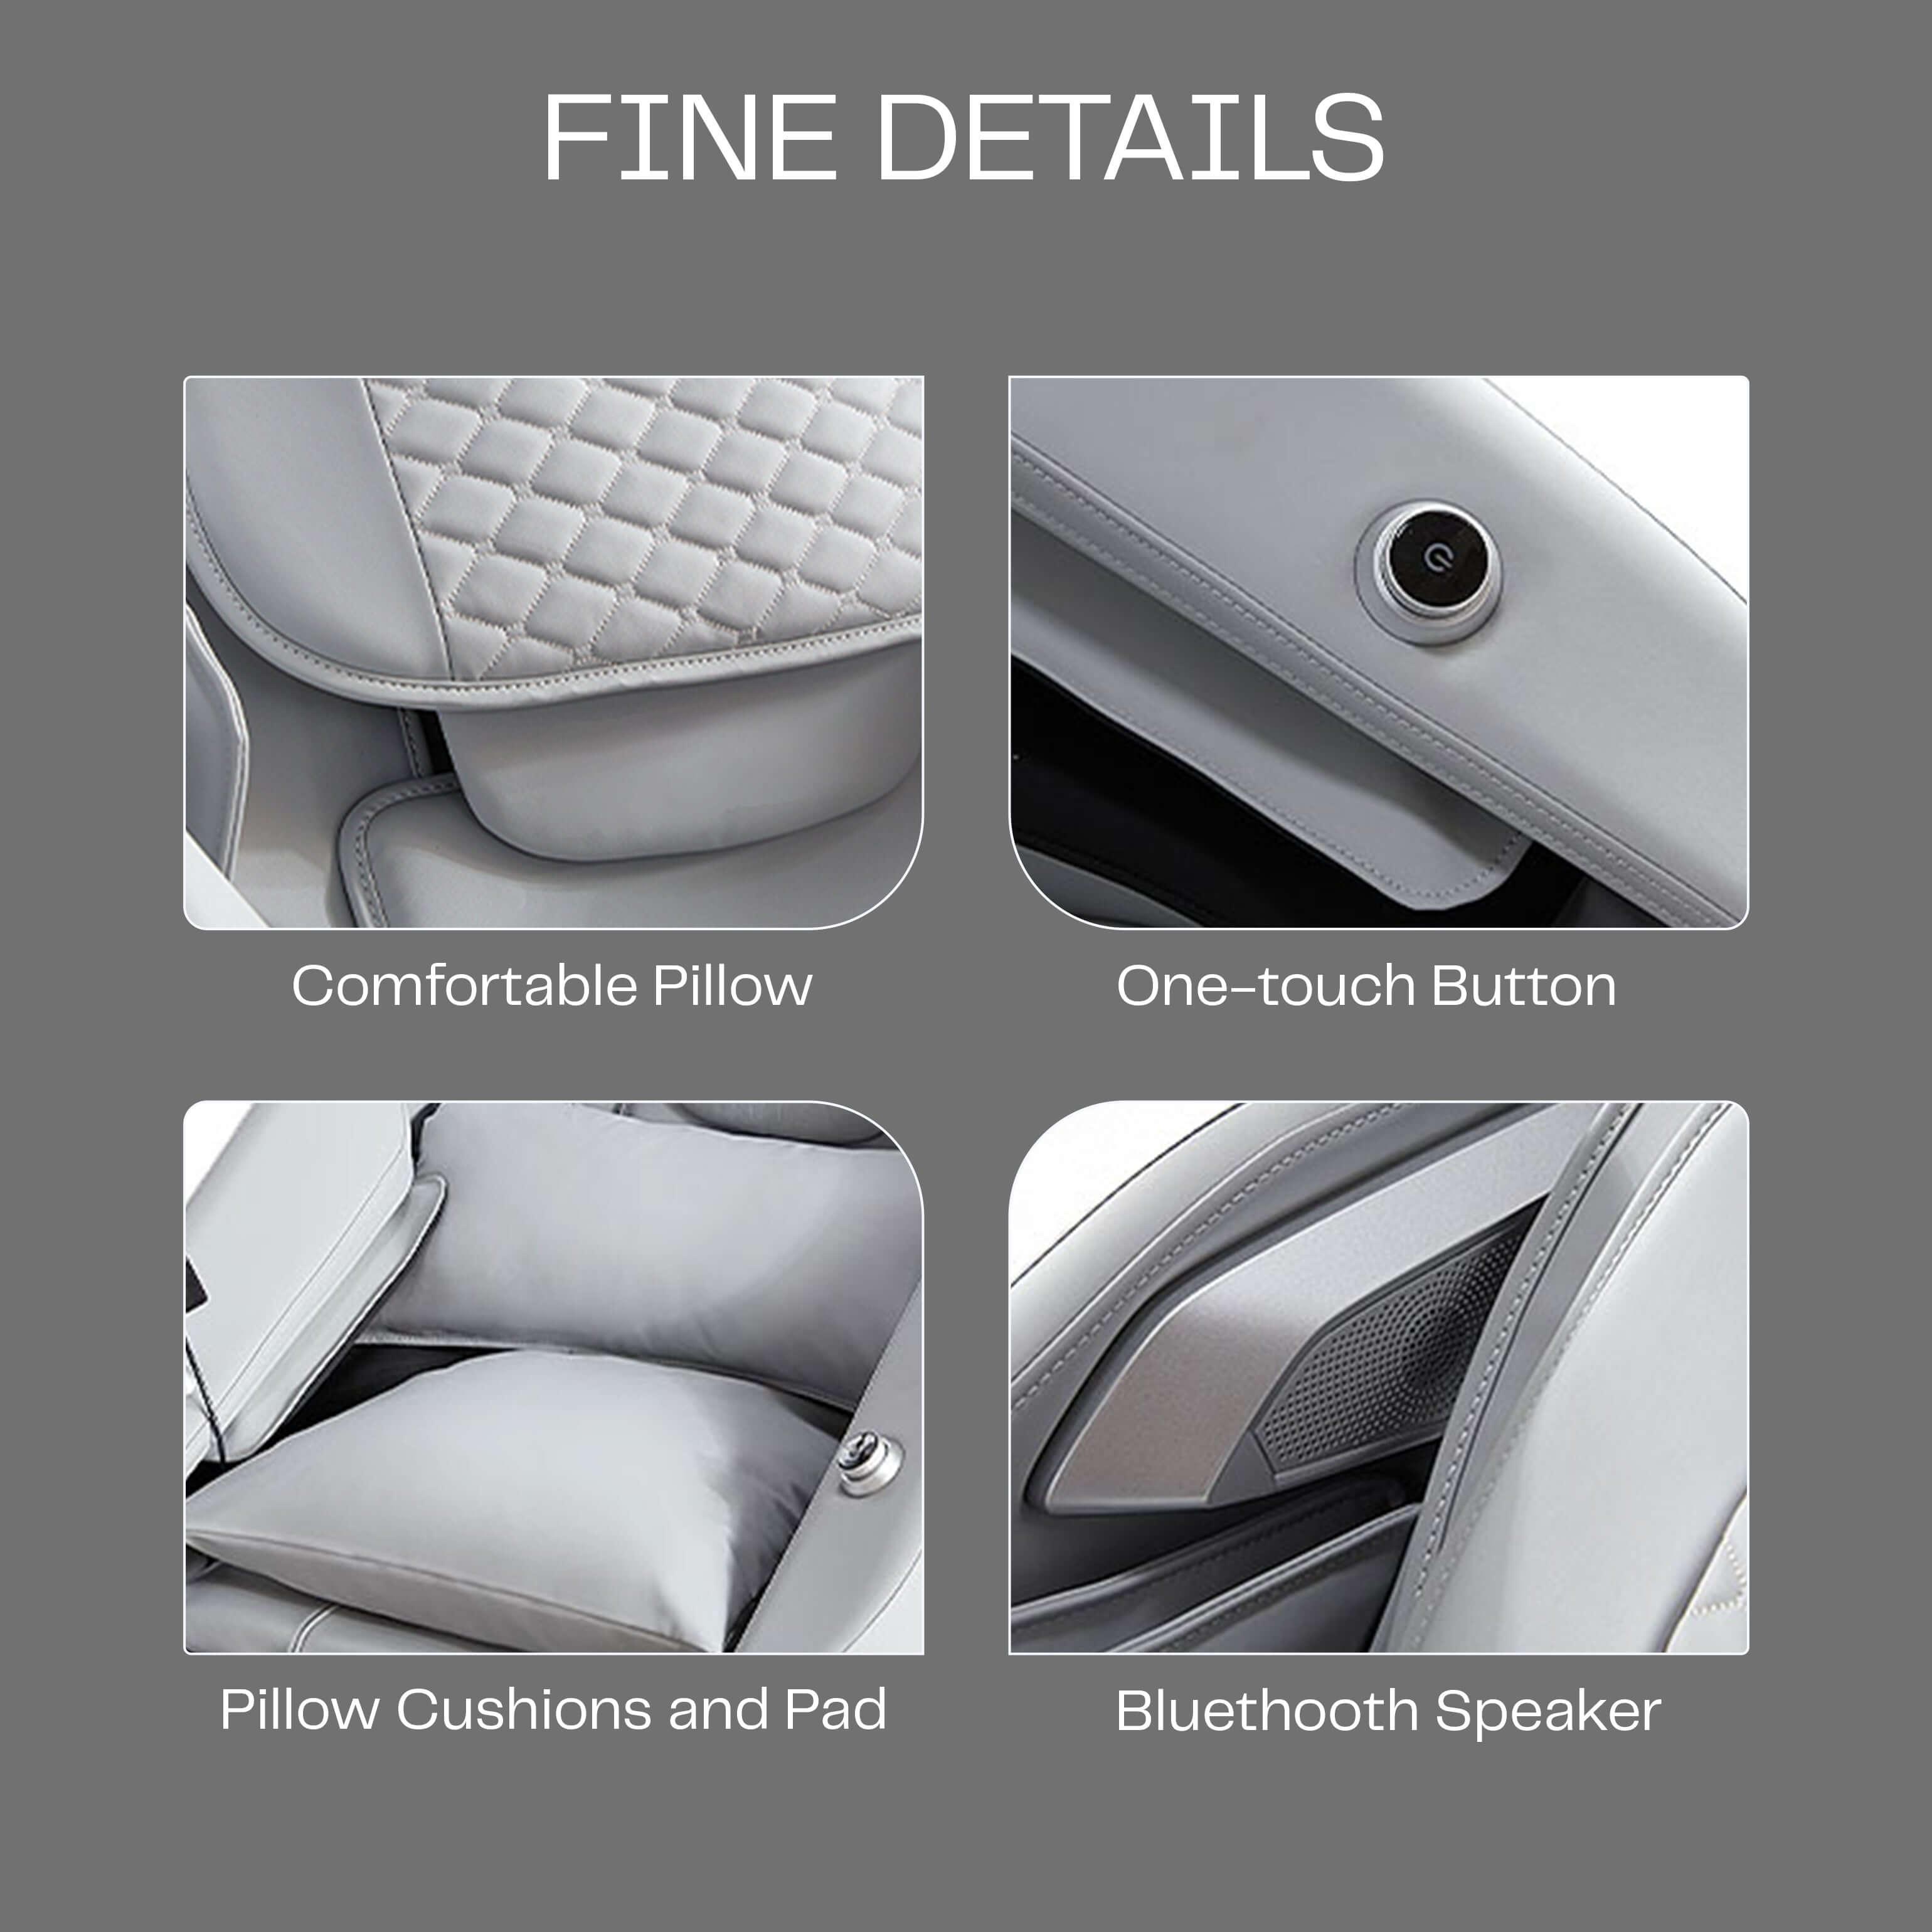 Close-up of Ekanite Massage Chair and Sofa features, including comfortable pillow, one-touch button, pillow cushions and pad, and Bluetooth speaker.